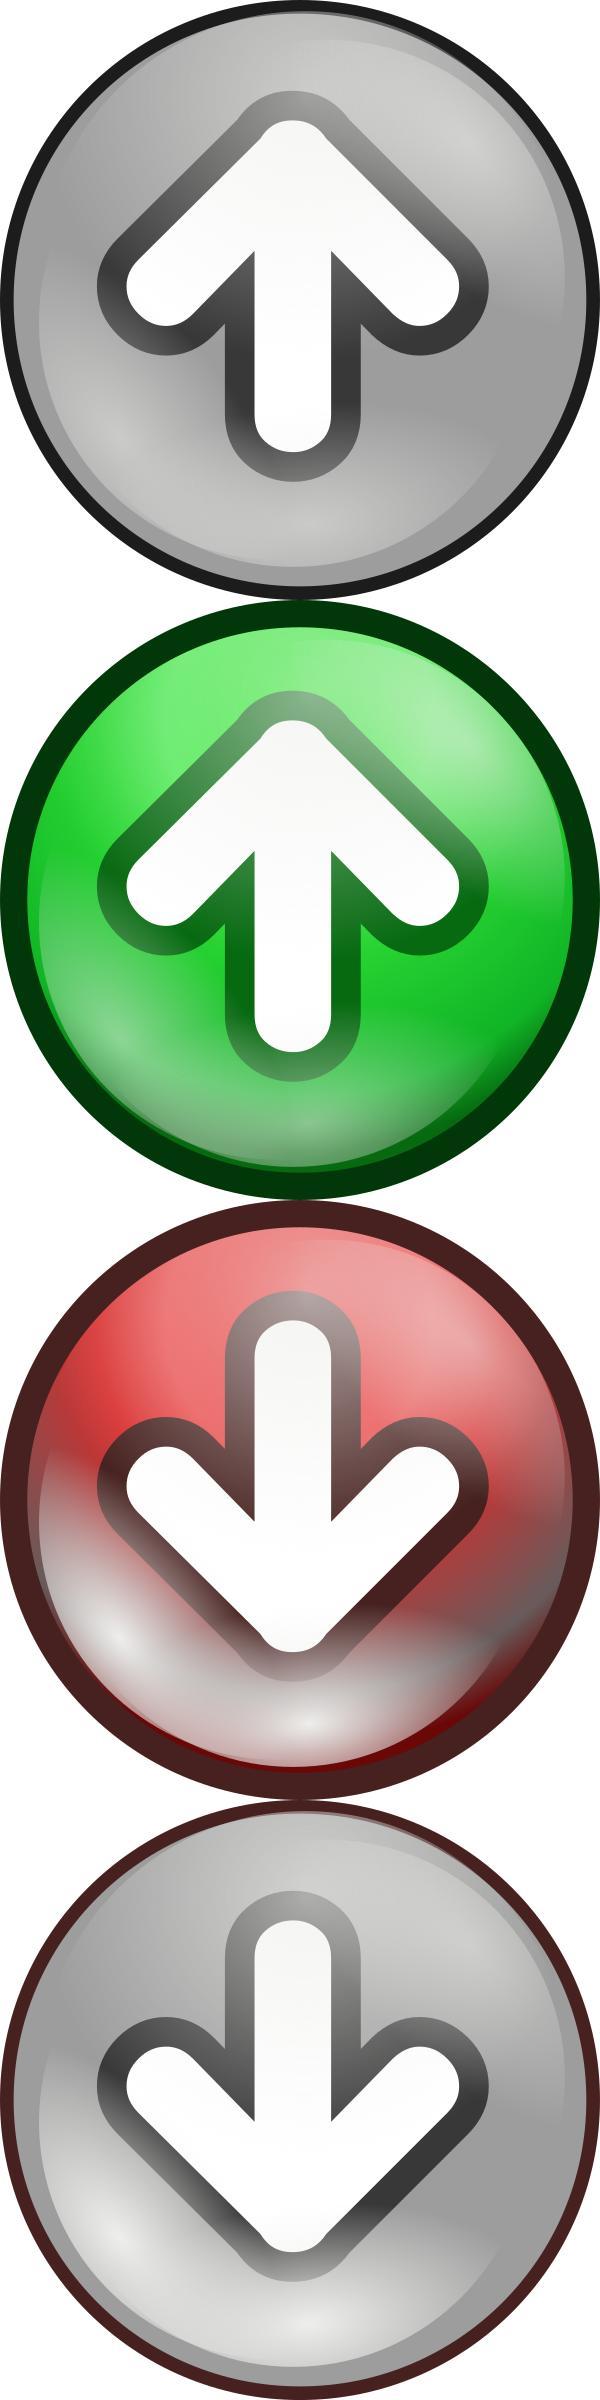 Shiny green/red voting arrows png transparent